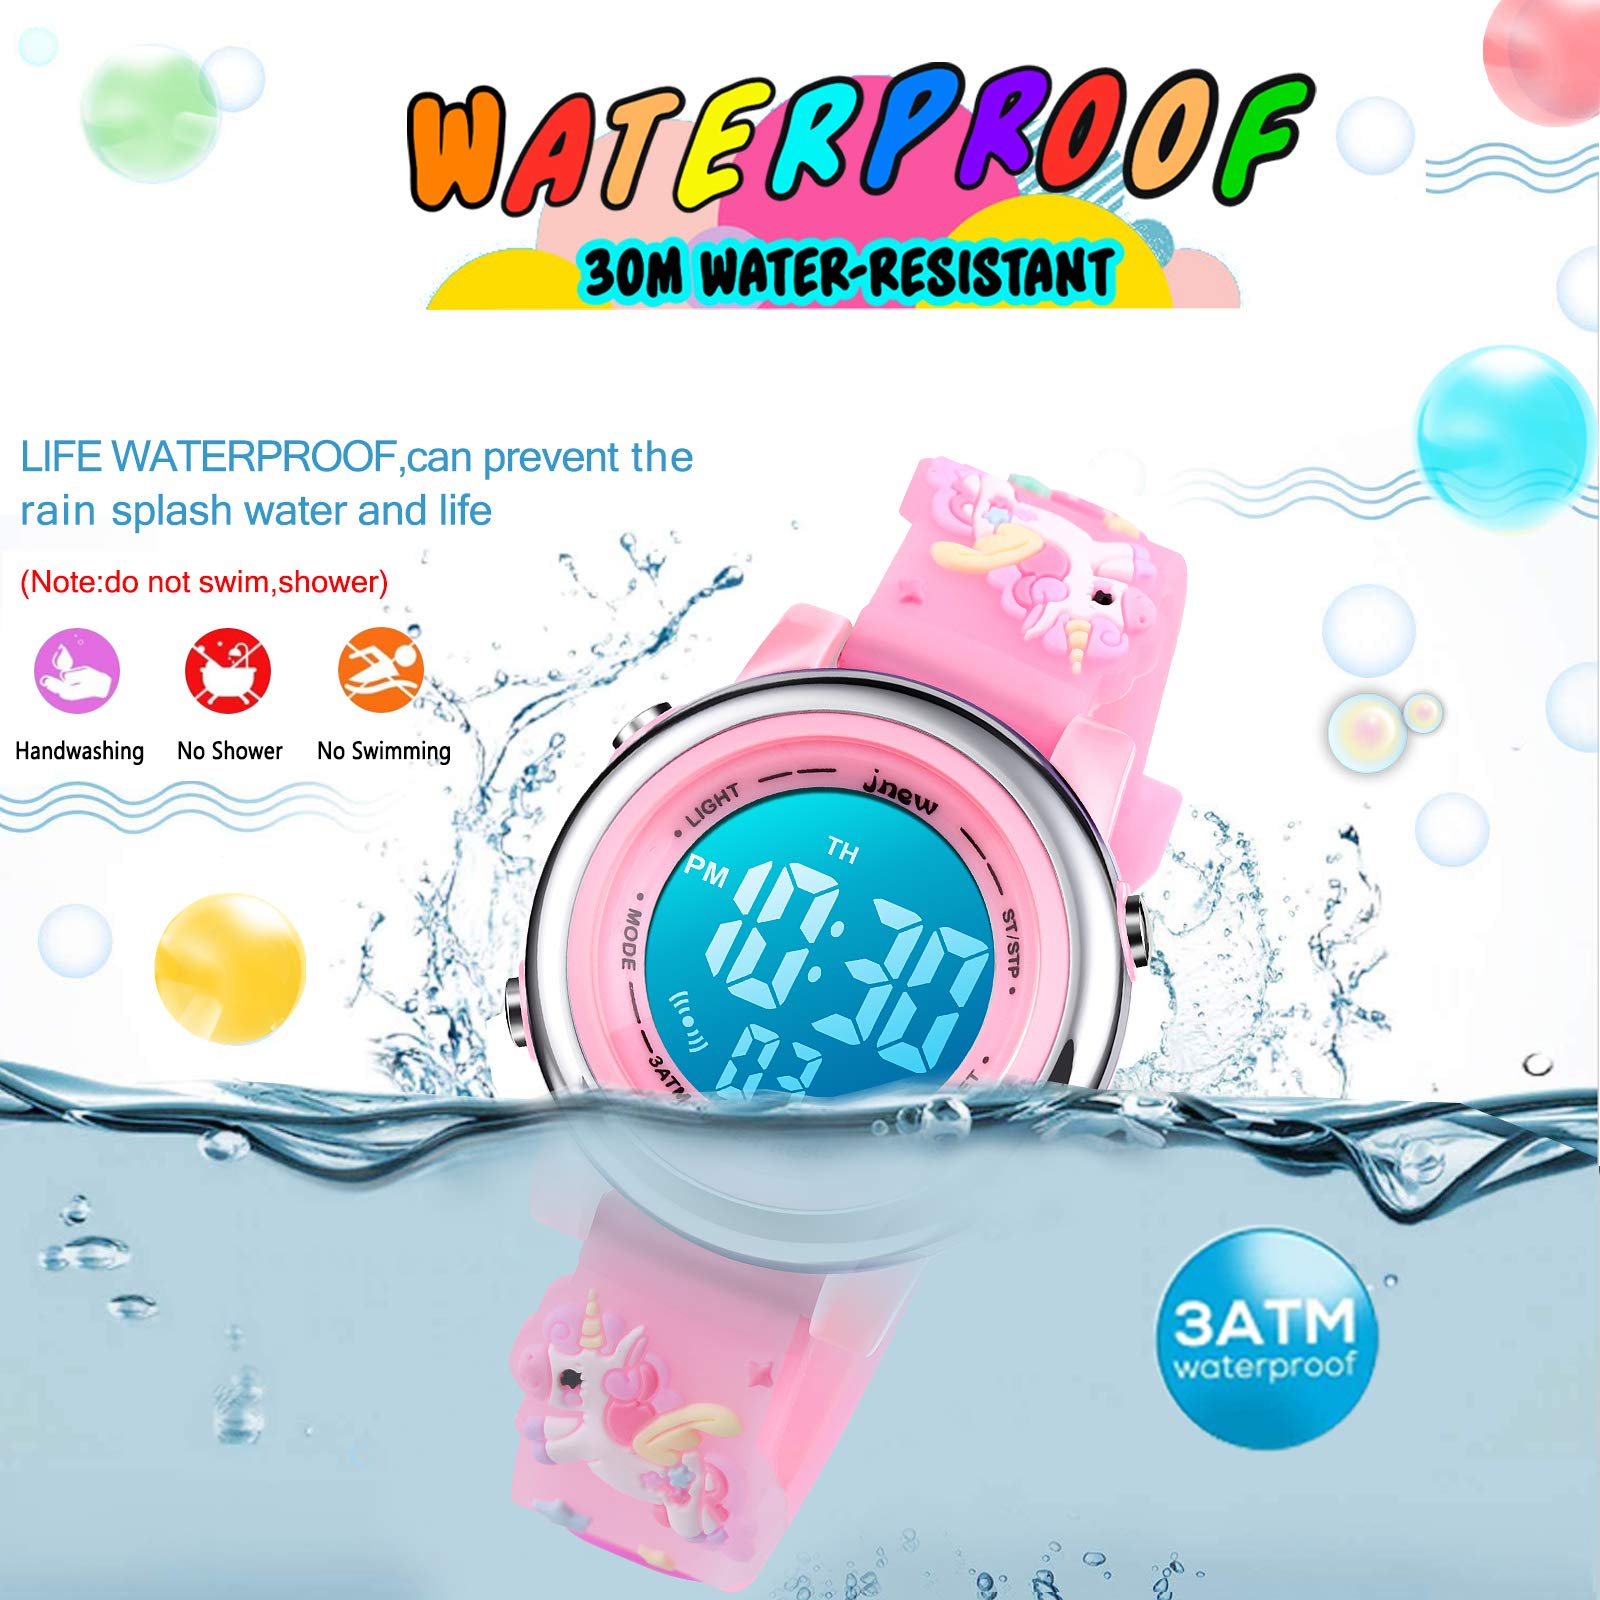 YxiYxi Kids Watches 3D Cute Cartoon Digital 7 Color Lights Toddler Wrist Watch with Waterproof Sports Outdoor LED Alarm Stopwatch Silicone Band for 3-10 Year Boys Girls Little Child